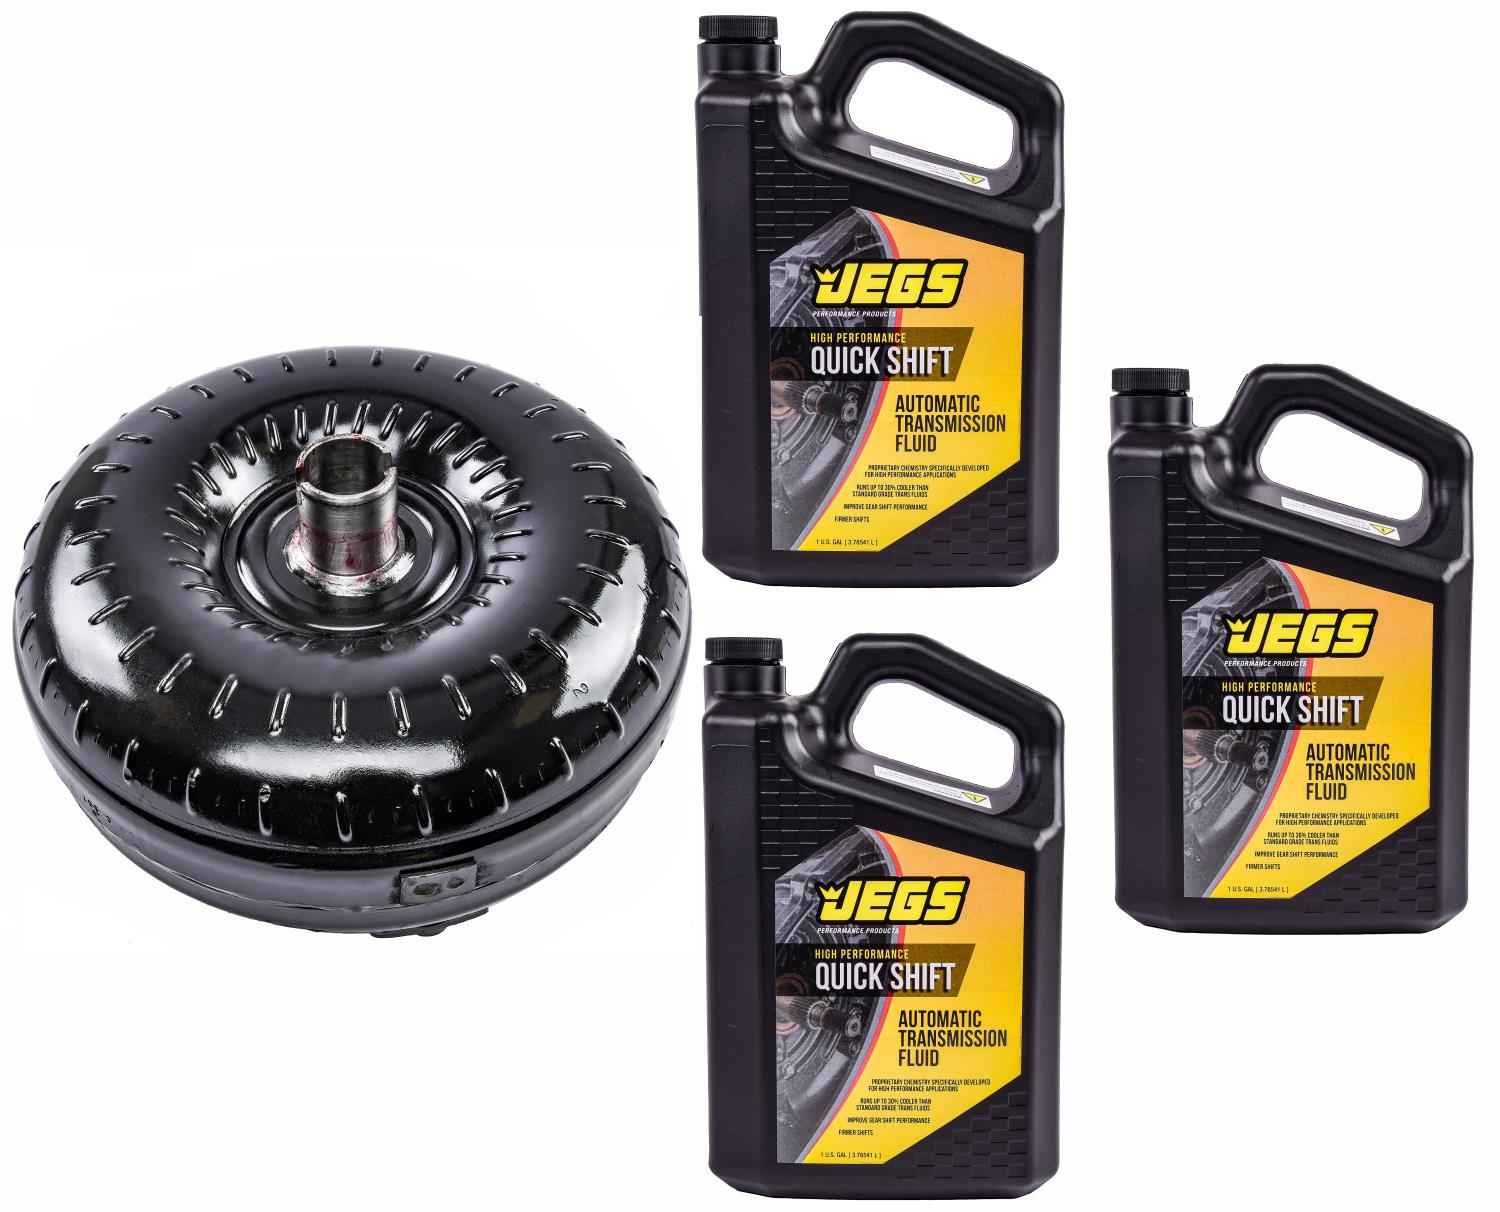 Torque Converter Kit for GM 700R4 [2400-2800 RPM Stall Speed]